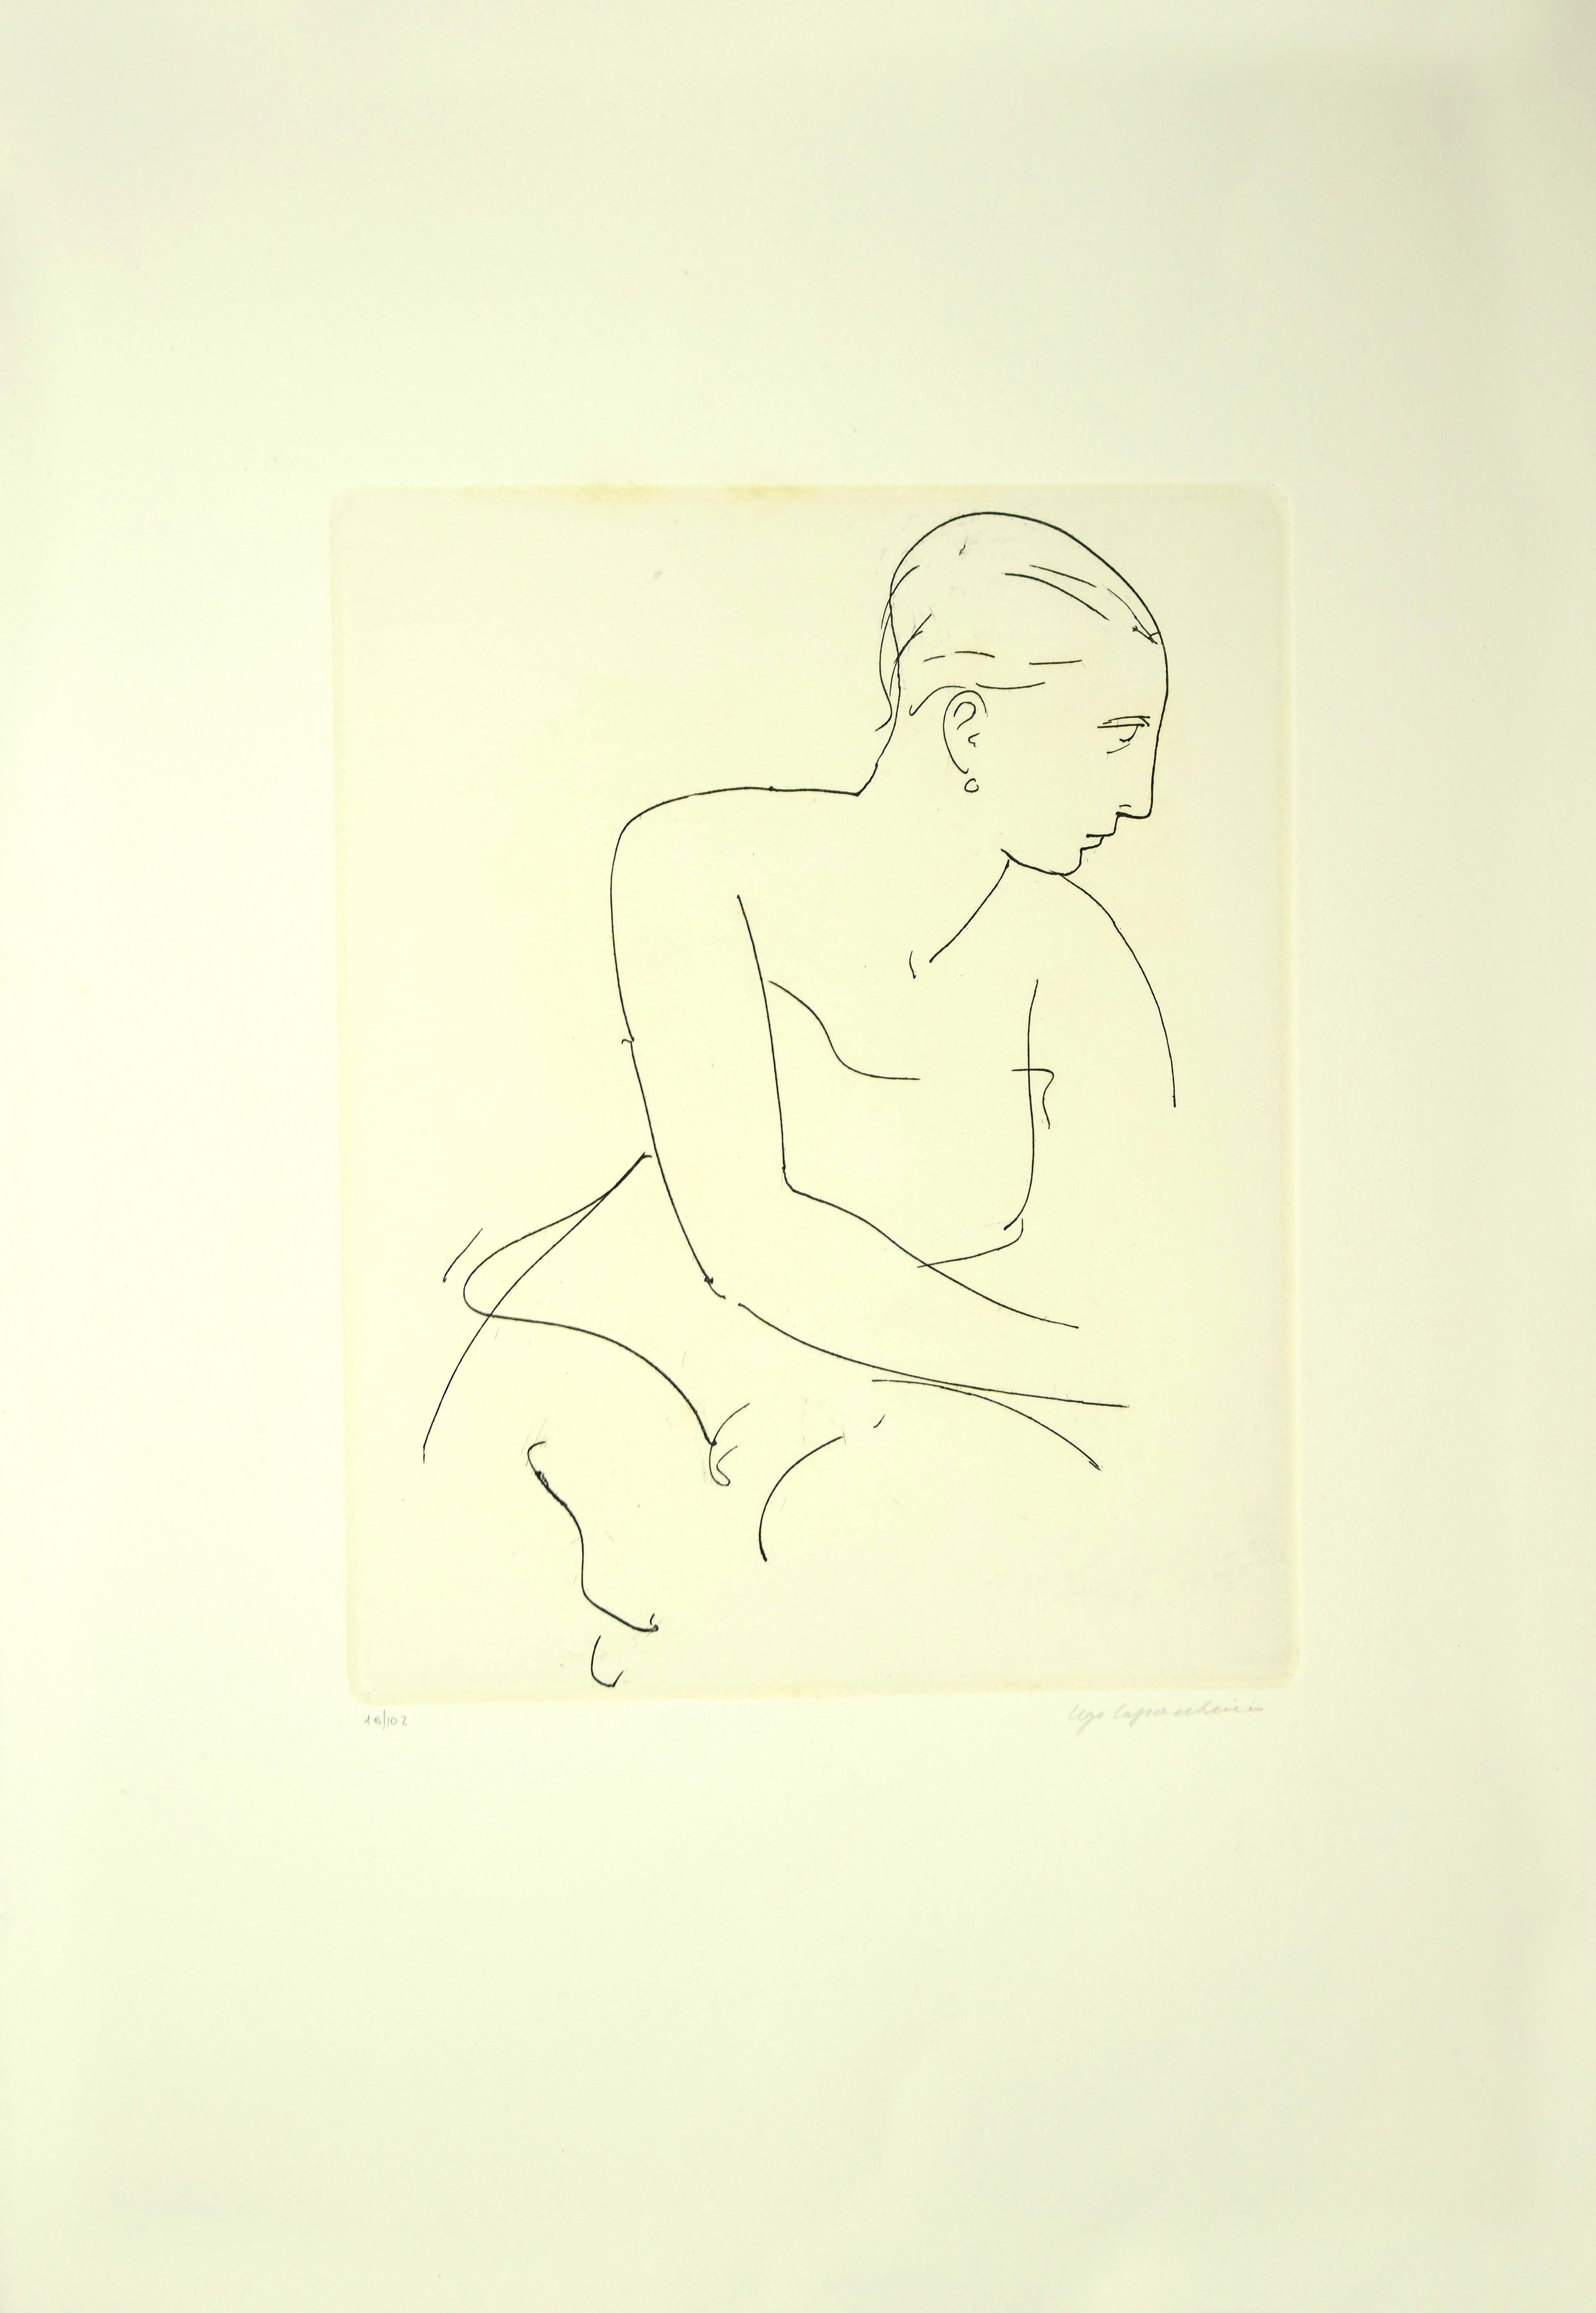 Profile of Woman - Etching and Drypoint by U. Capocchini - 1964 - Print by Ugo Capocchini